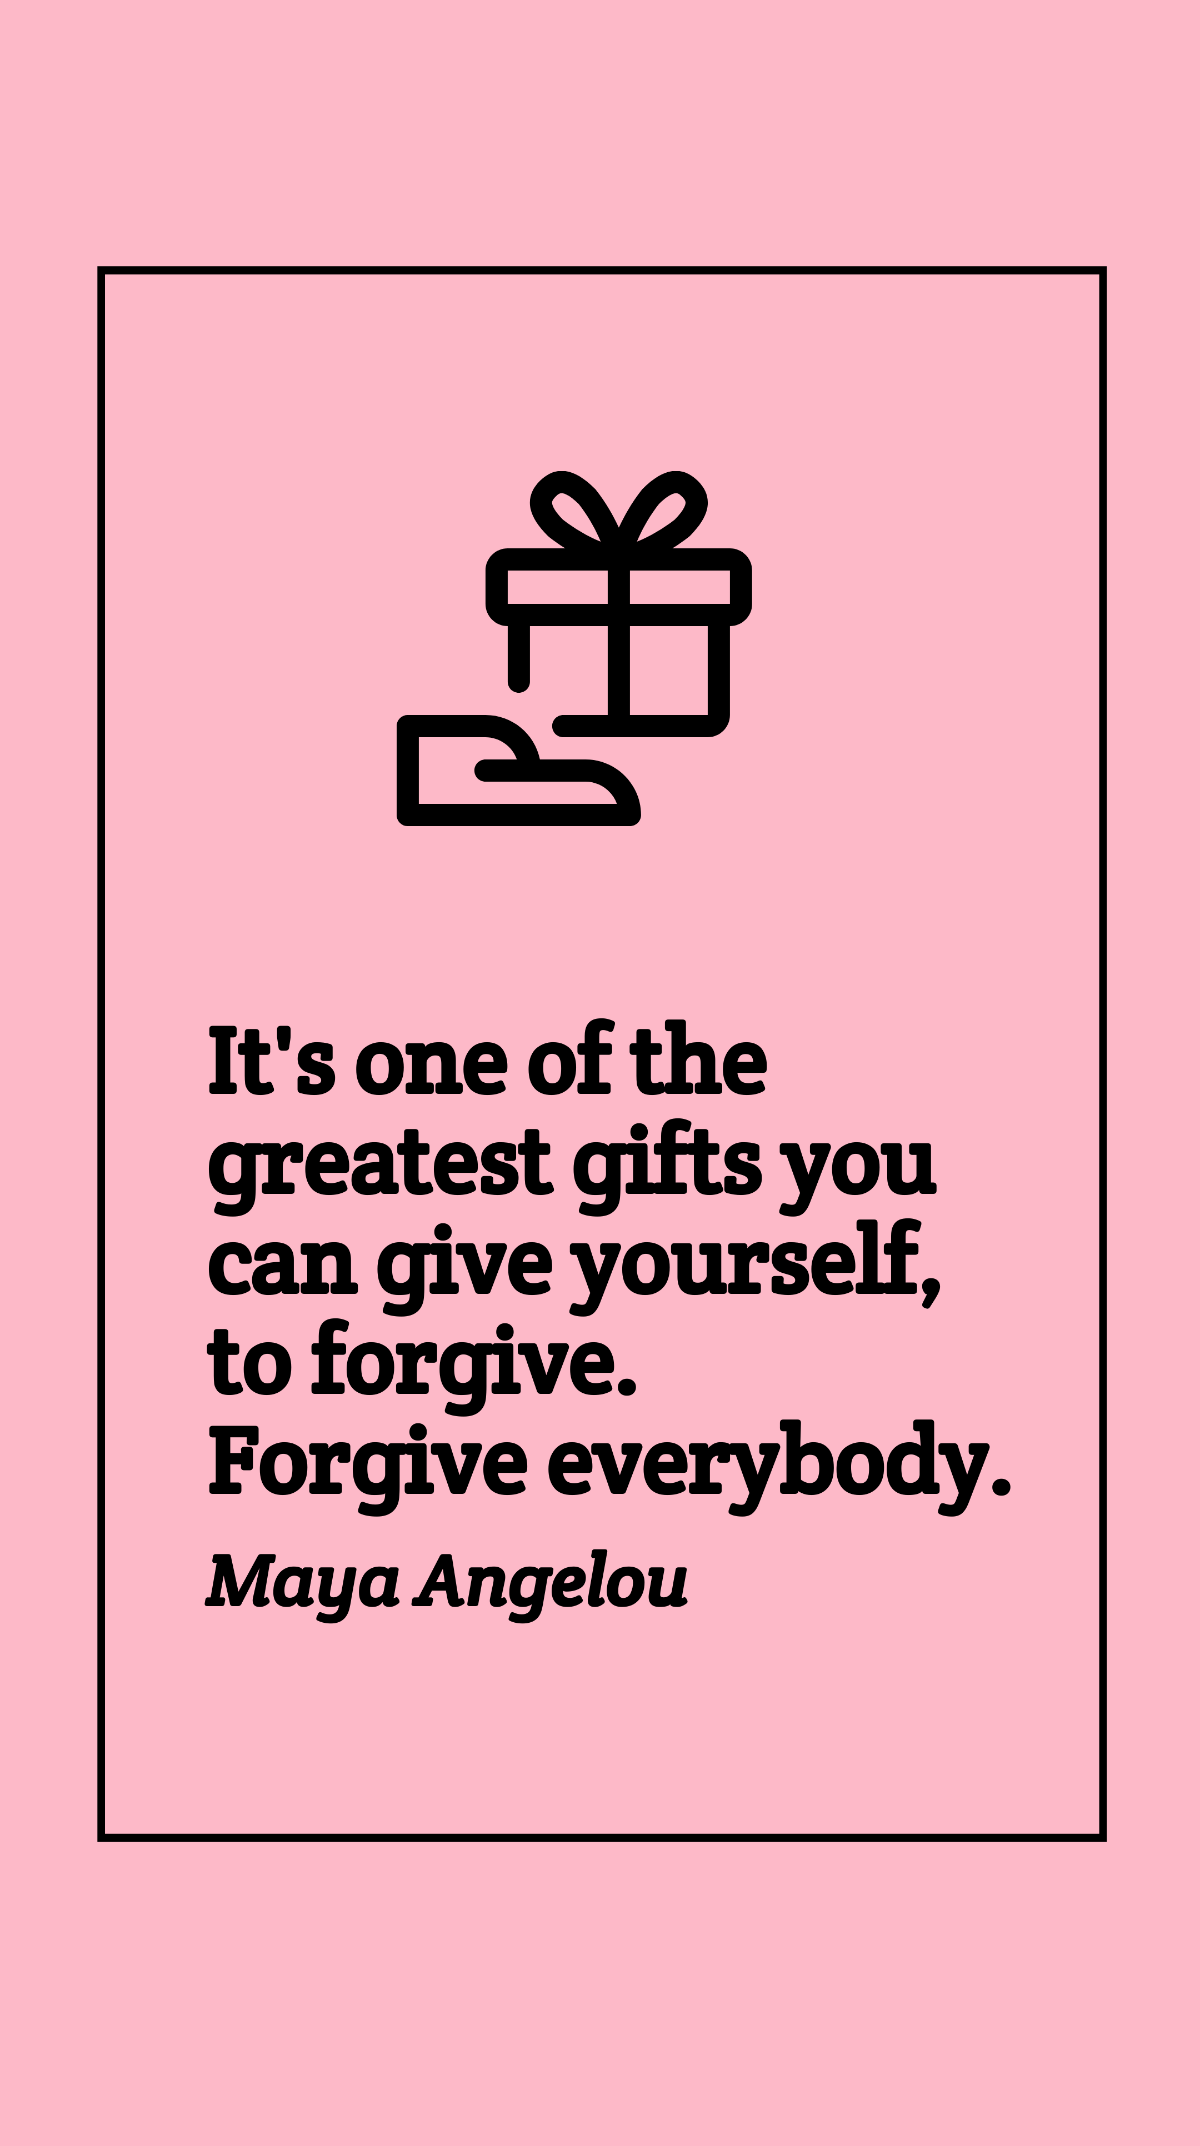 Maya Angelou - It's one of the greatest gifts you can give yourself, to forgive. Forgive everybody. Template